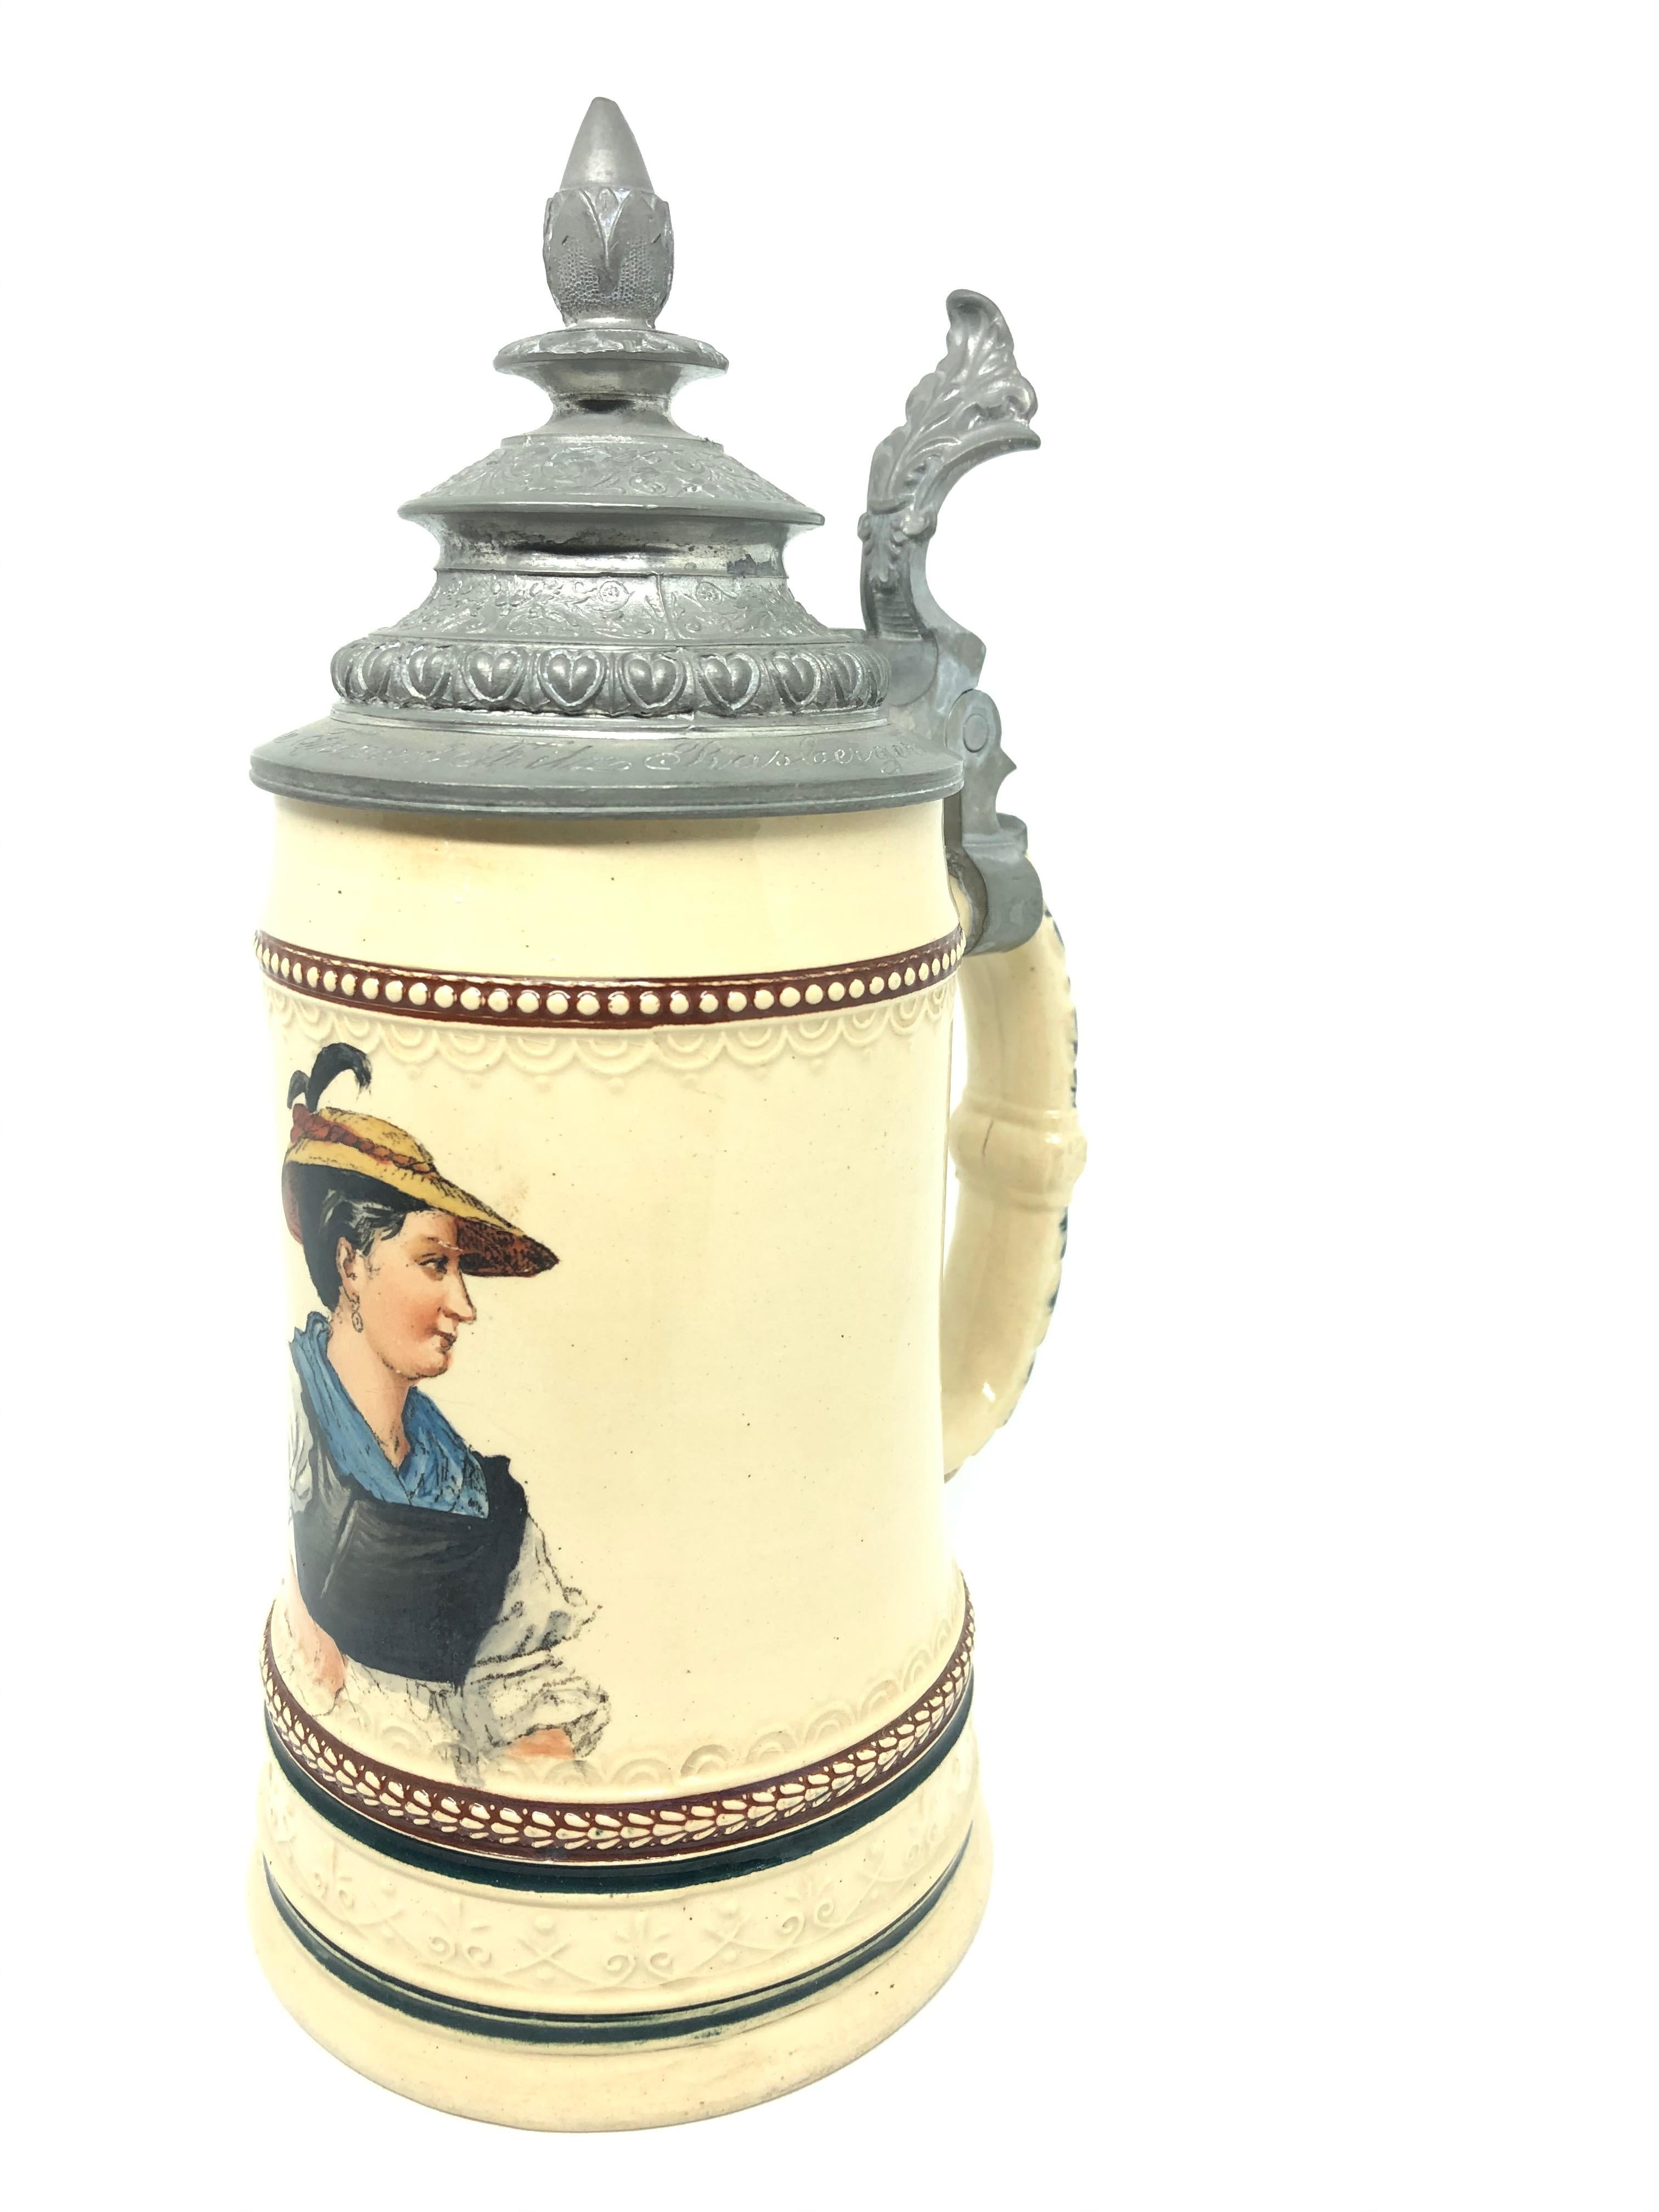 A gorgeous beer stein, hand painted picture of a Bavarian Female. This character beer stein has been made in Germany circa 1900s by Graf. Absolutely gorgeous piece hand painted and still in great condition, without damage. Lid works properly. Marked